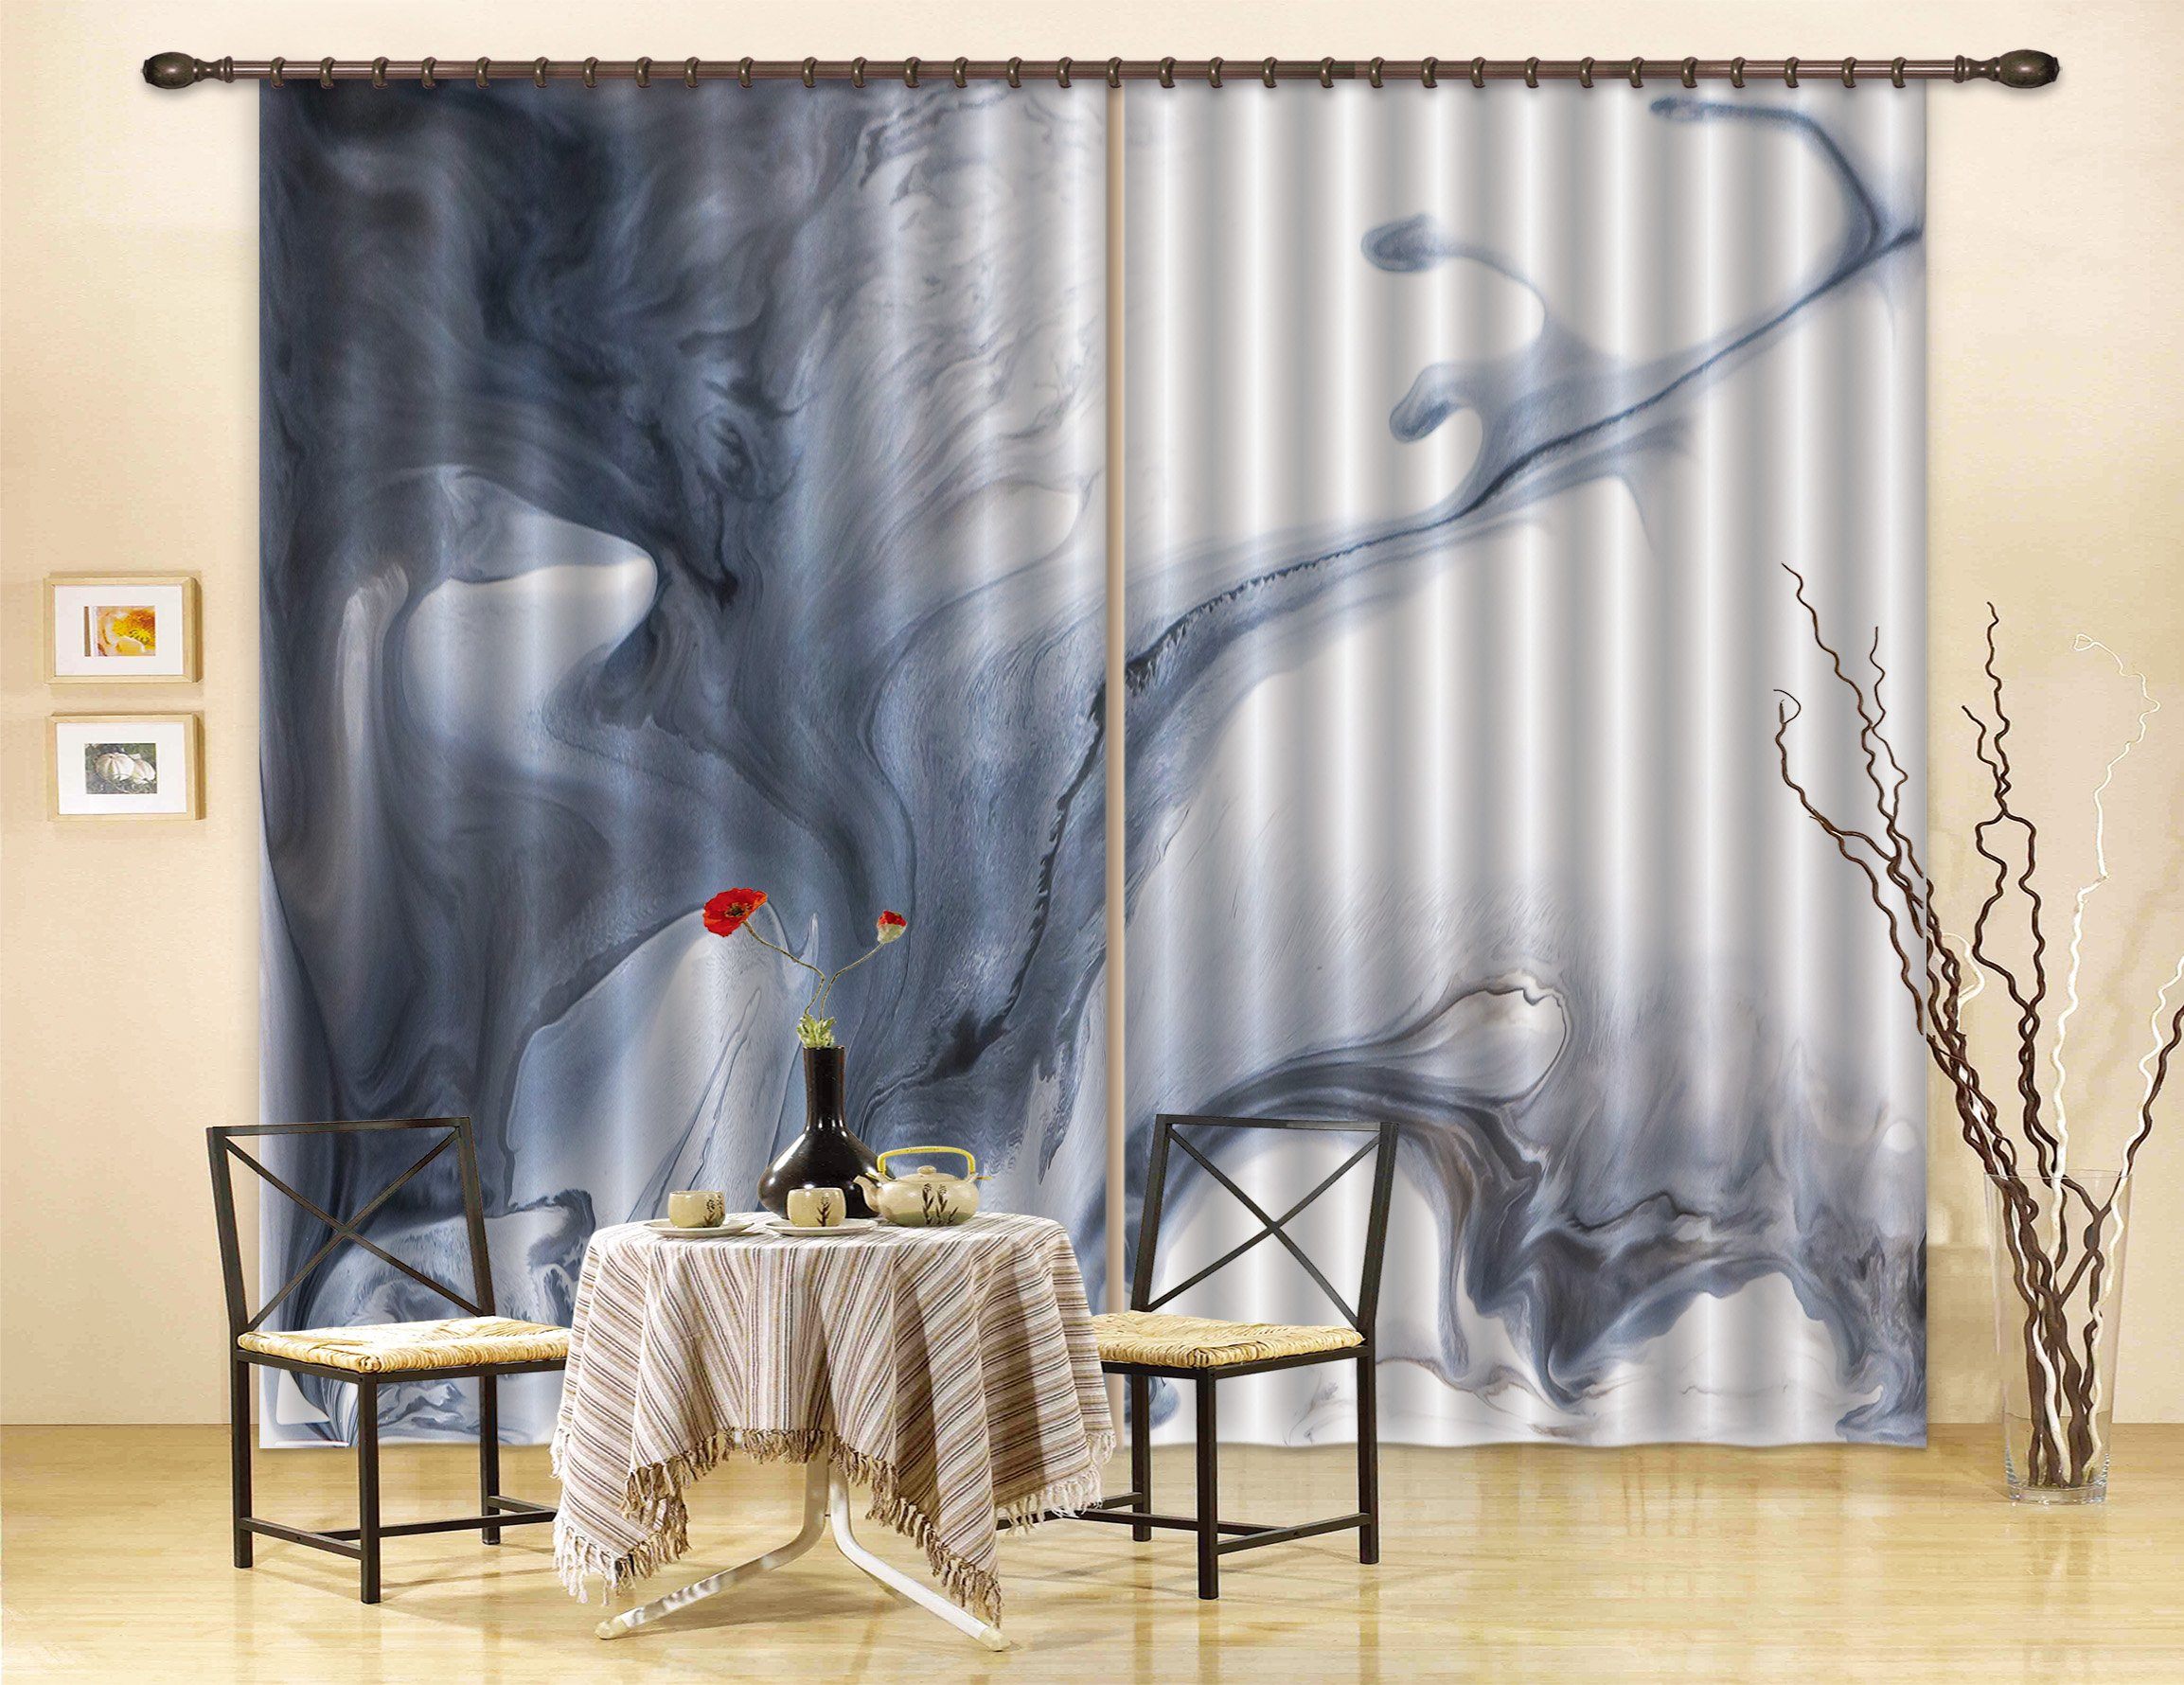 3D Ink Drawing Abstract 81 Curtains Drapes Curtains AJ Creativity Home 